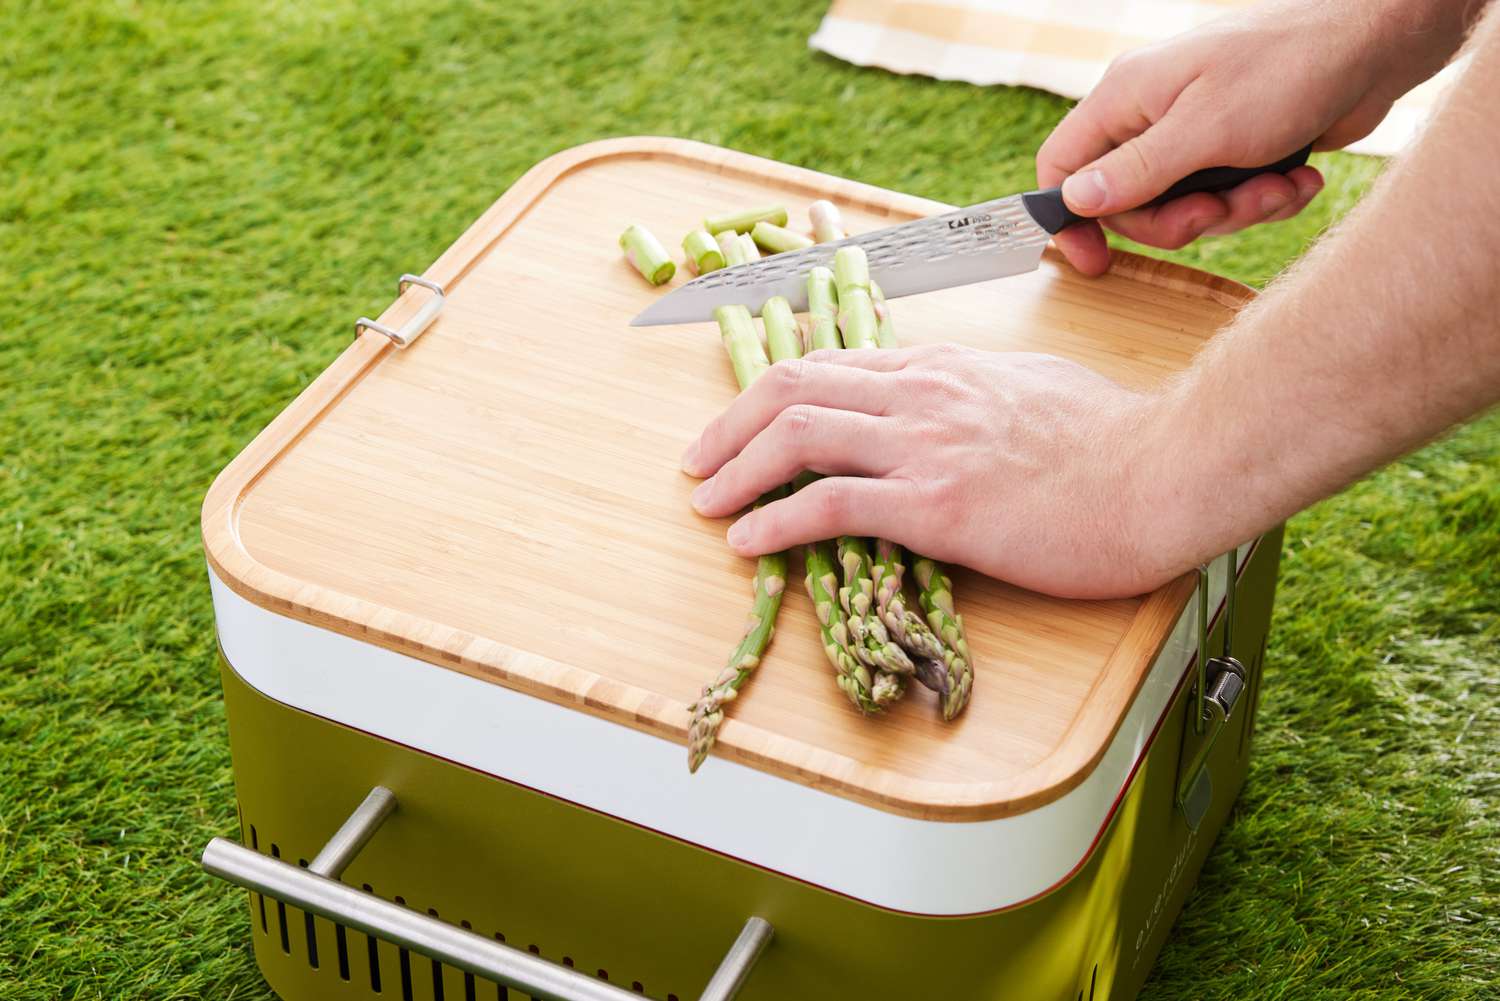 Hands chopping asparagus on a wooden cutting board on top of a Everdure Cube Portable Charcoal Grill